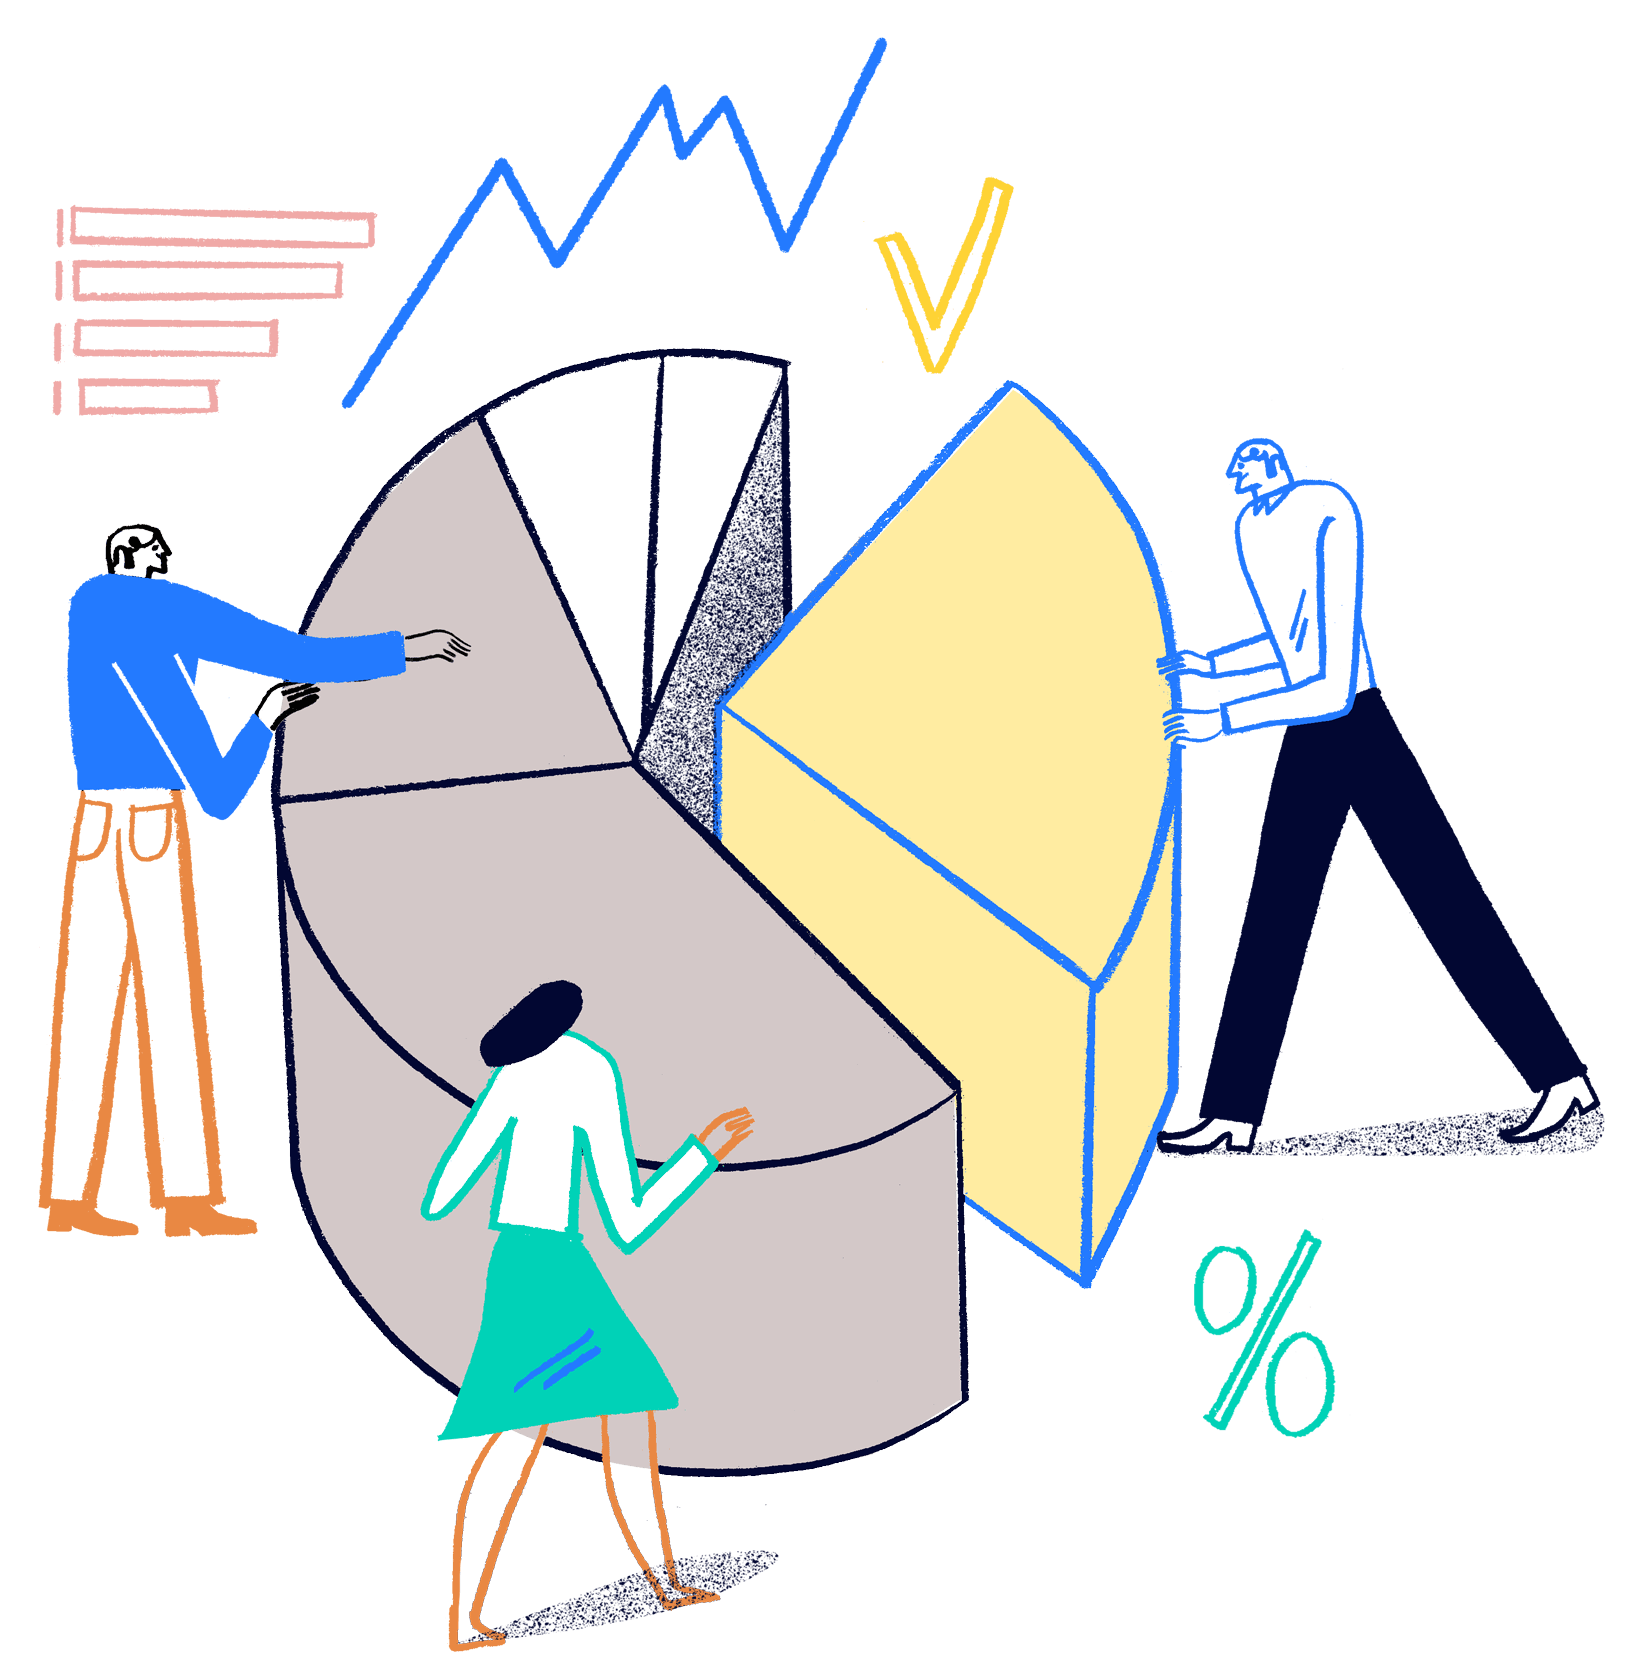 Illustration of 3 people taking pieces of a pie chart, surrounded by data